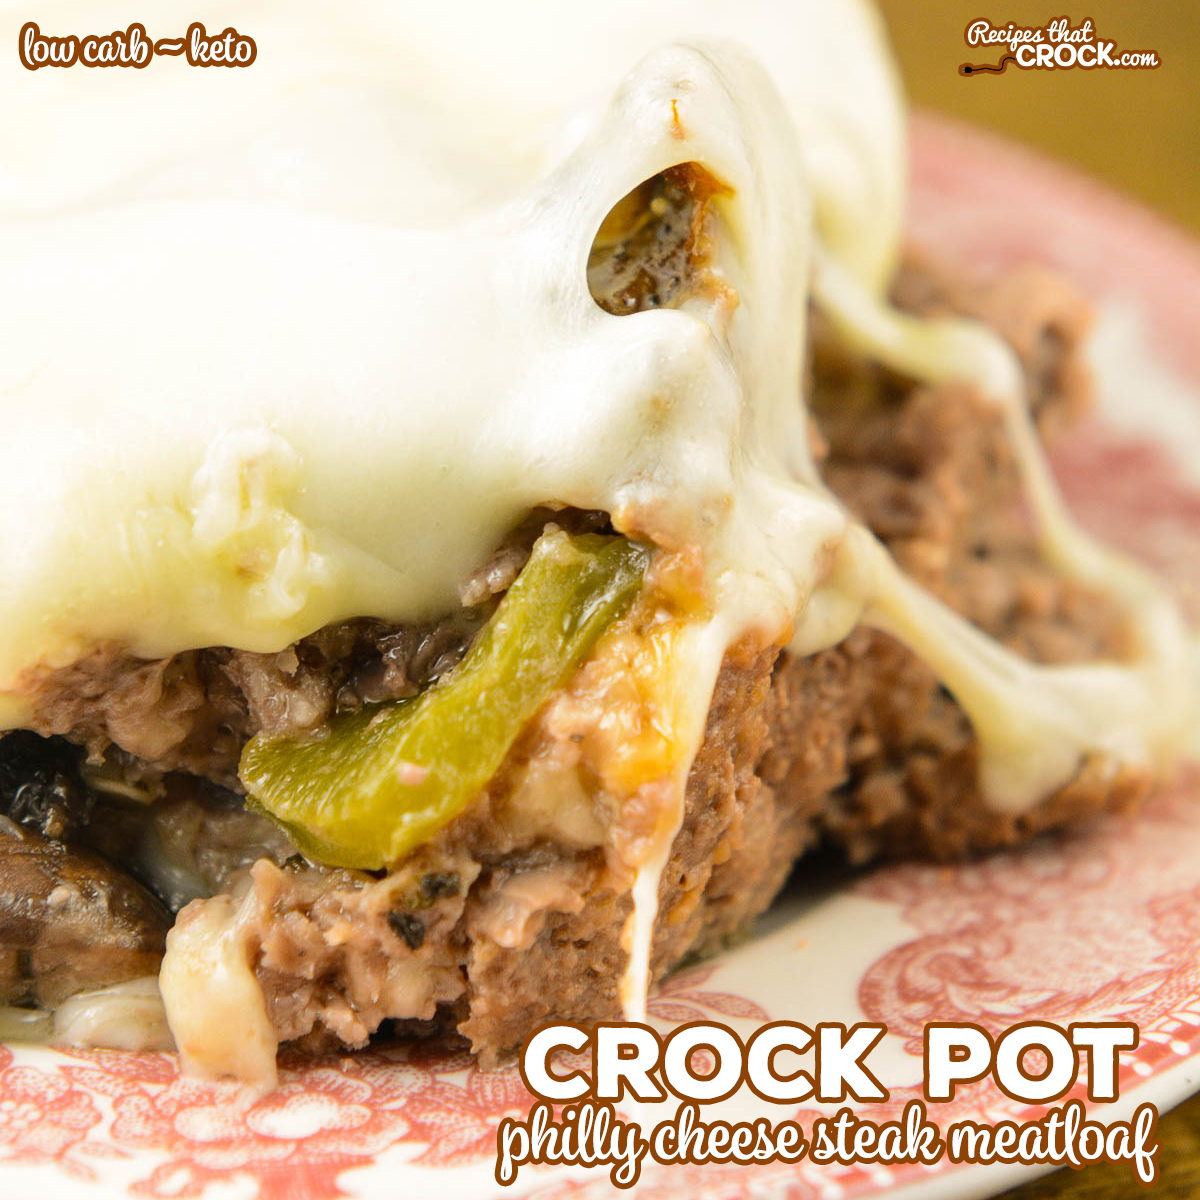 Do you love Philly Cheese Steaks? Our Crock Pot Philly Cheese Steak Meatloaf has the flavor of your favorite sandwich in a low carb meatloaf!